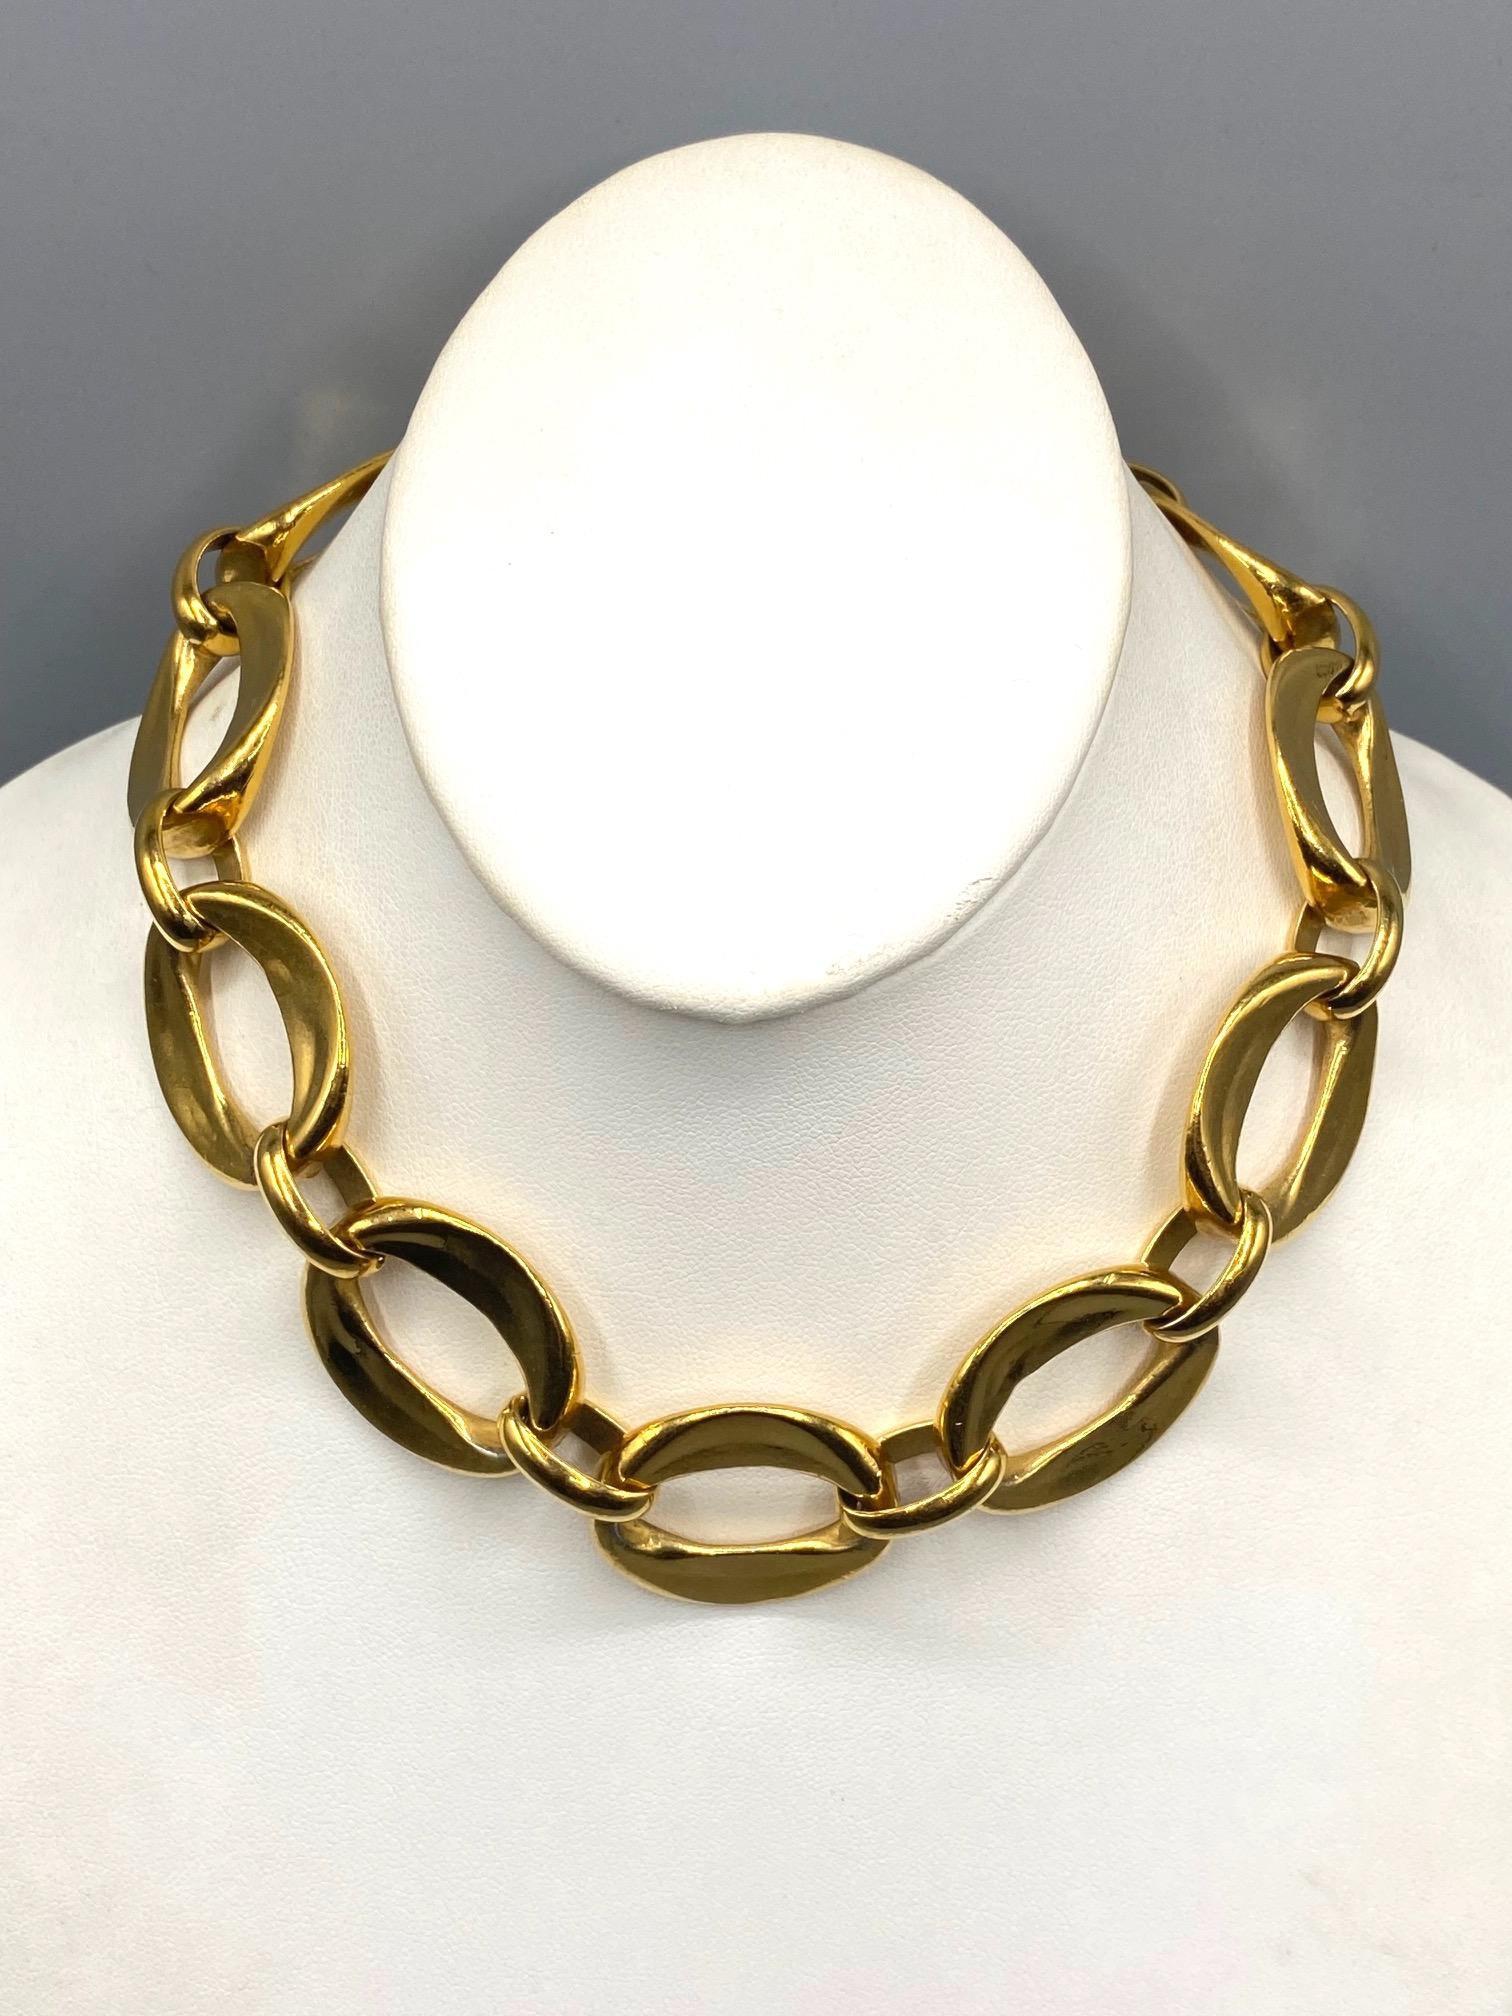 Women's or Men's Chanel Early 1980s Large Oval Link Necklace